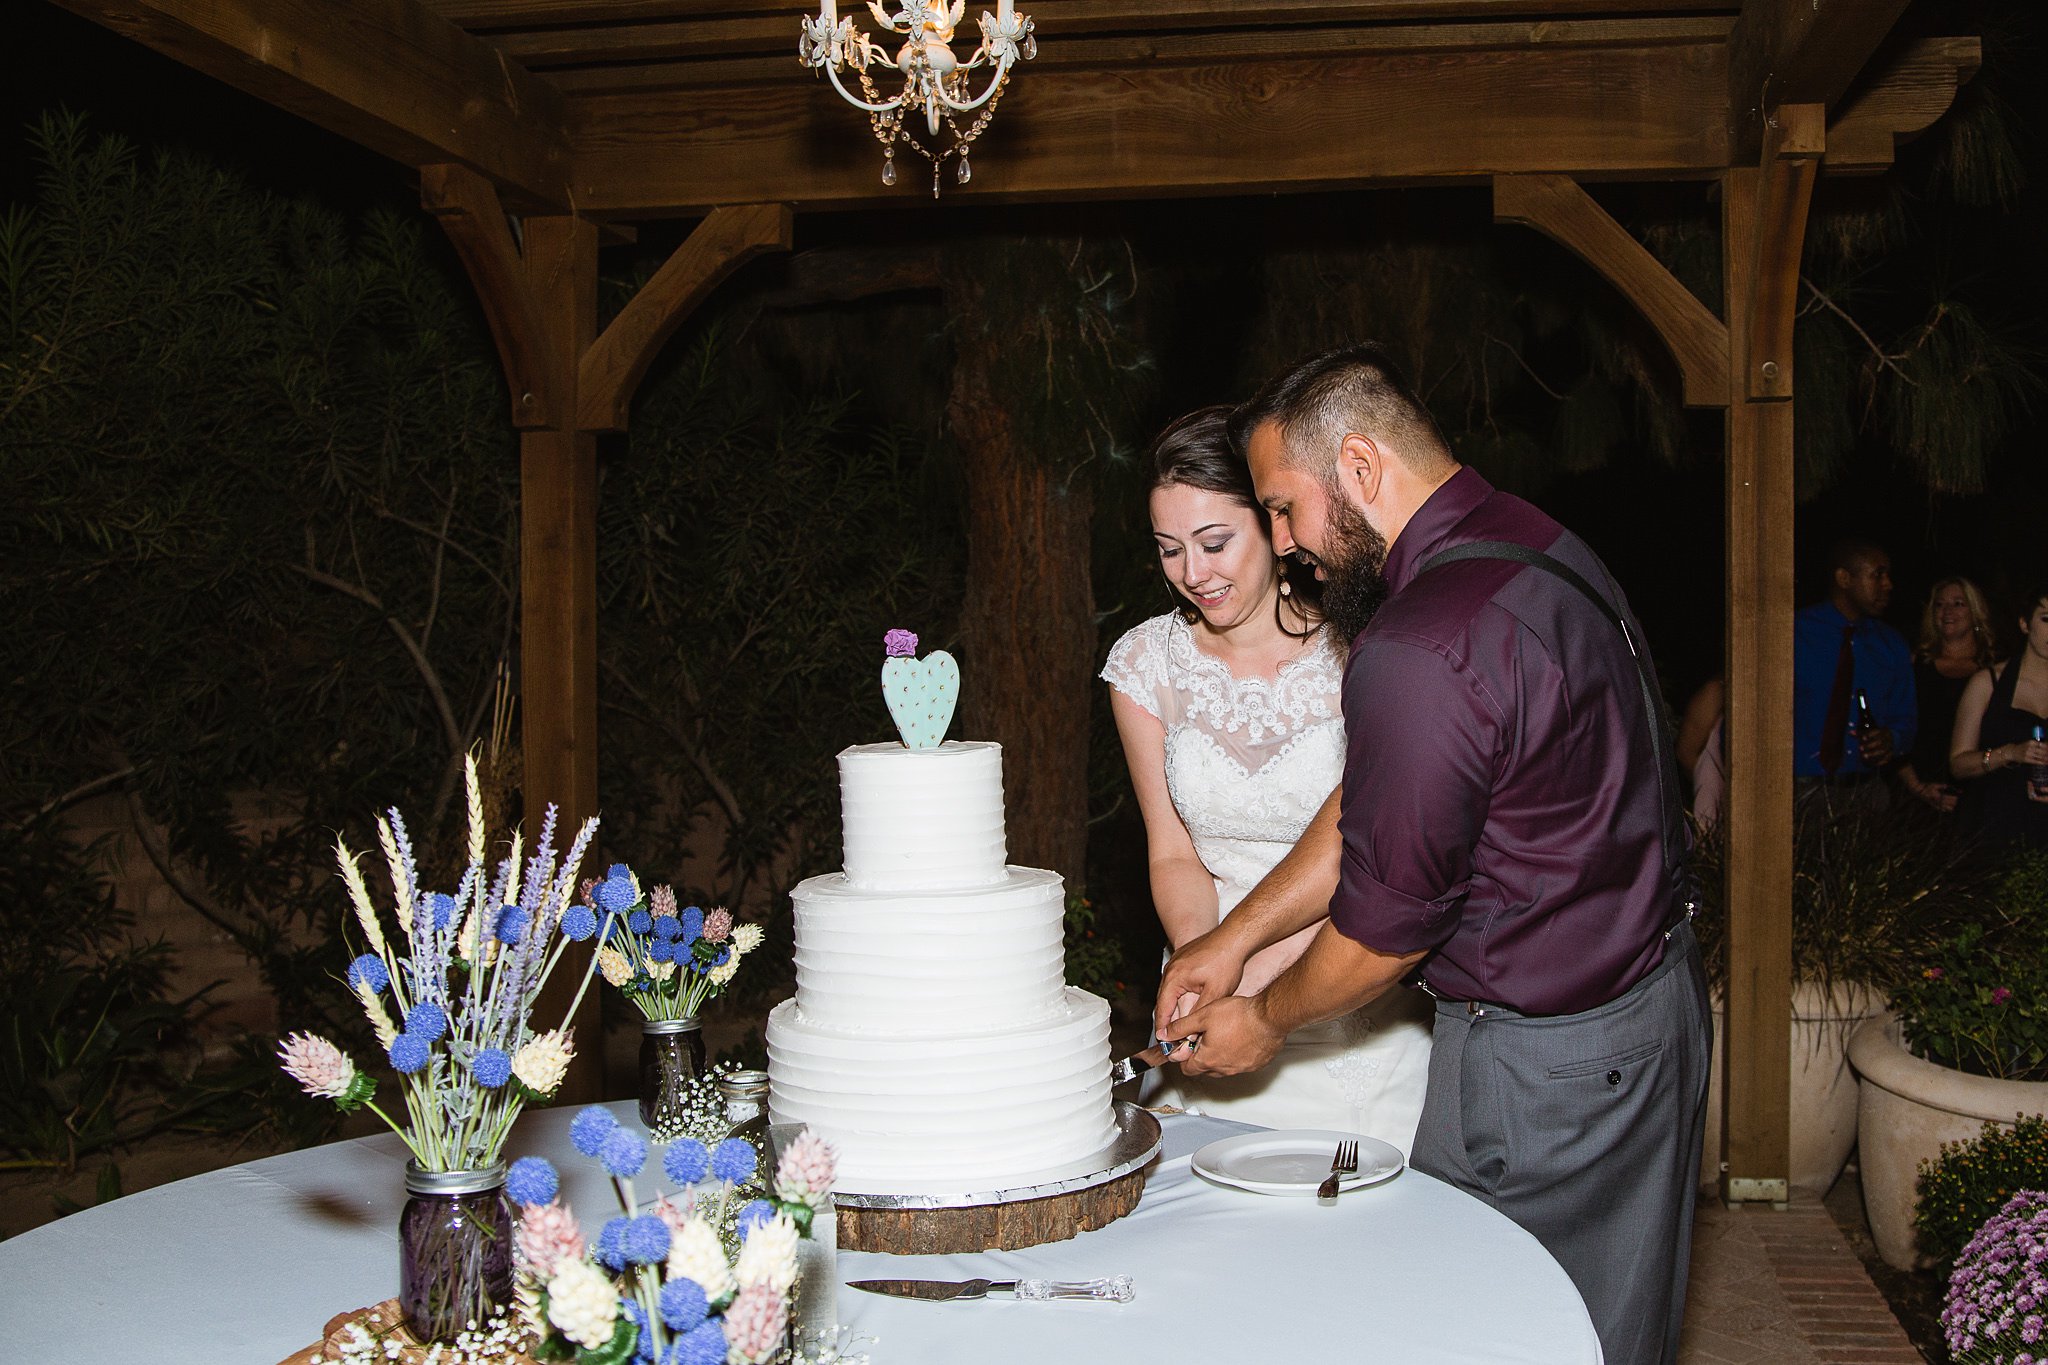 Bride and groom cutting the cake at their rustic chic wedding reception at Schnepf Farms Farmhouse by Arizona wedding photographer PMA Photography.